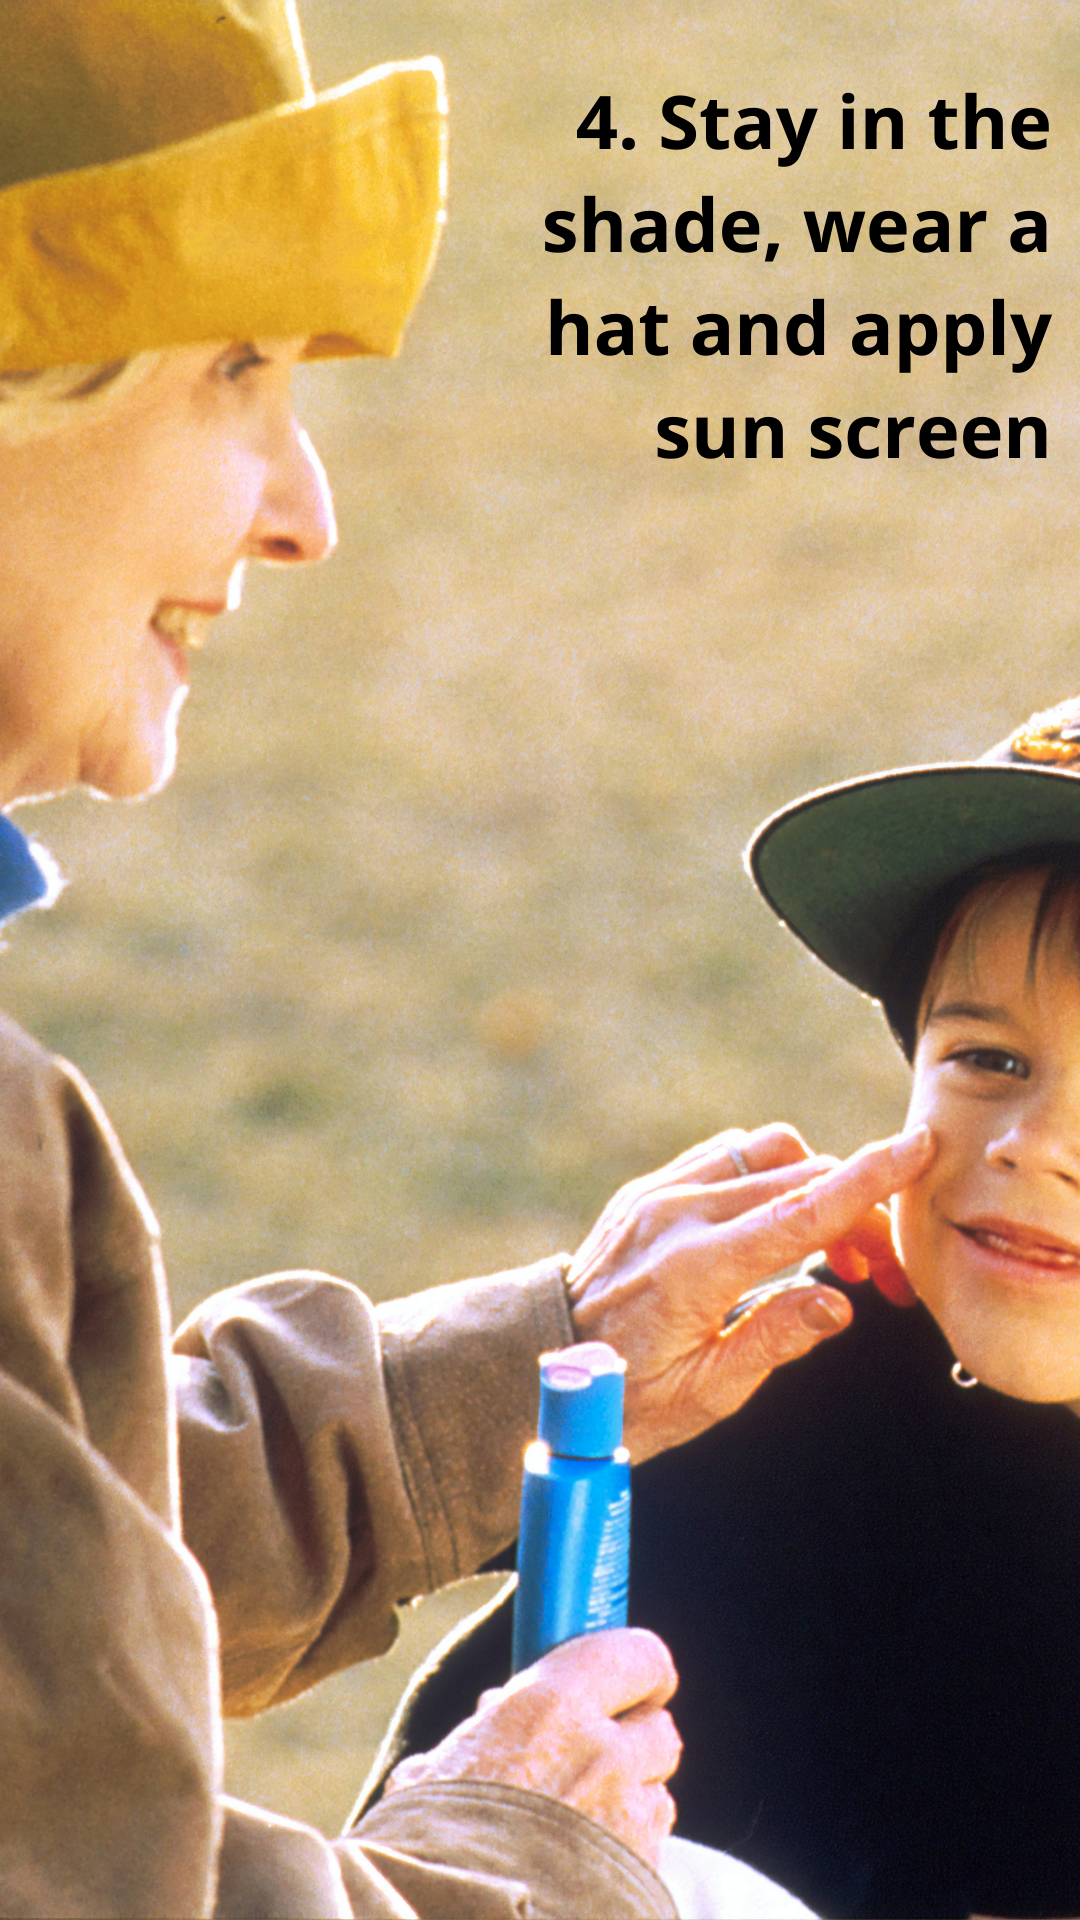 4. Stay in the shade, wear a hat and apply sun screen. (Photo of woman applying sun screen to boy, both wear hats)